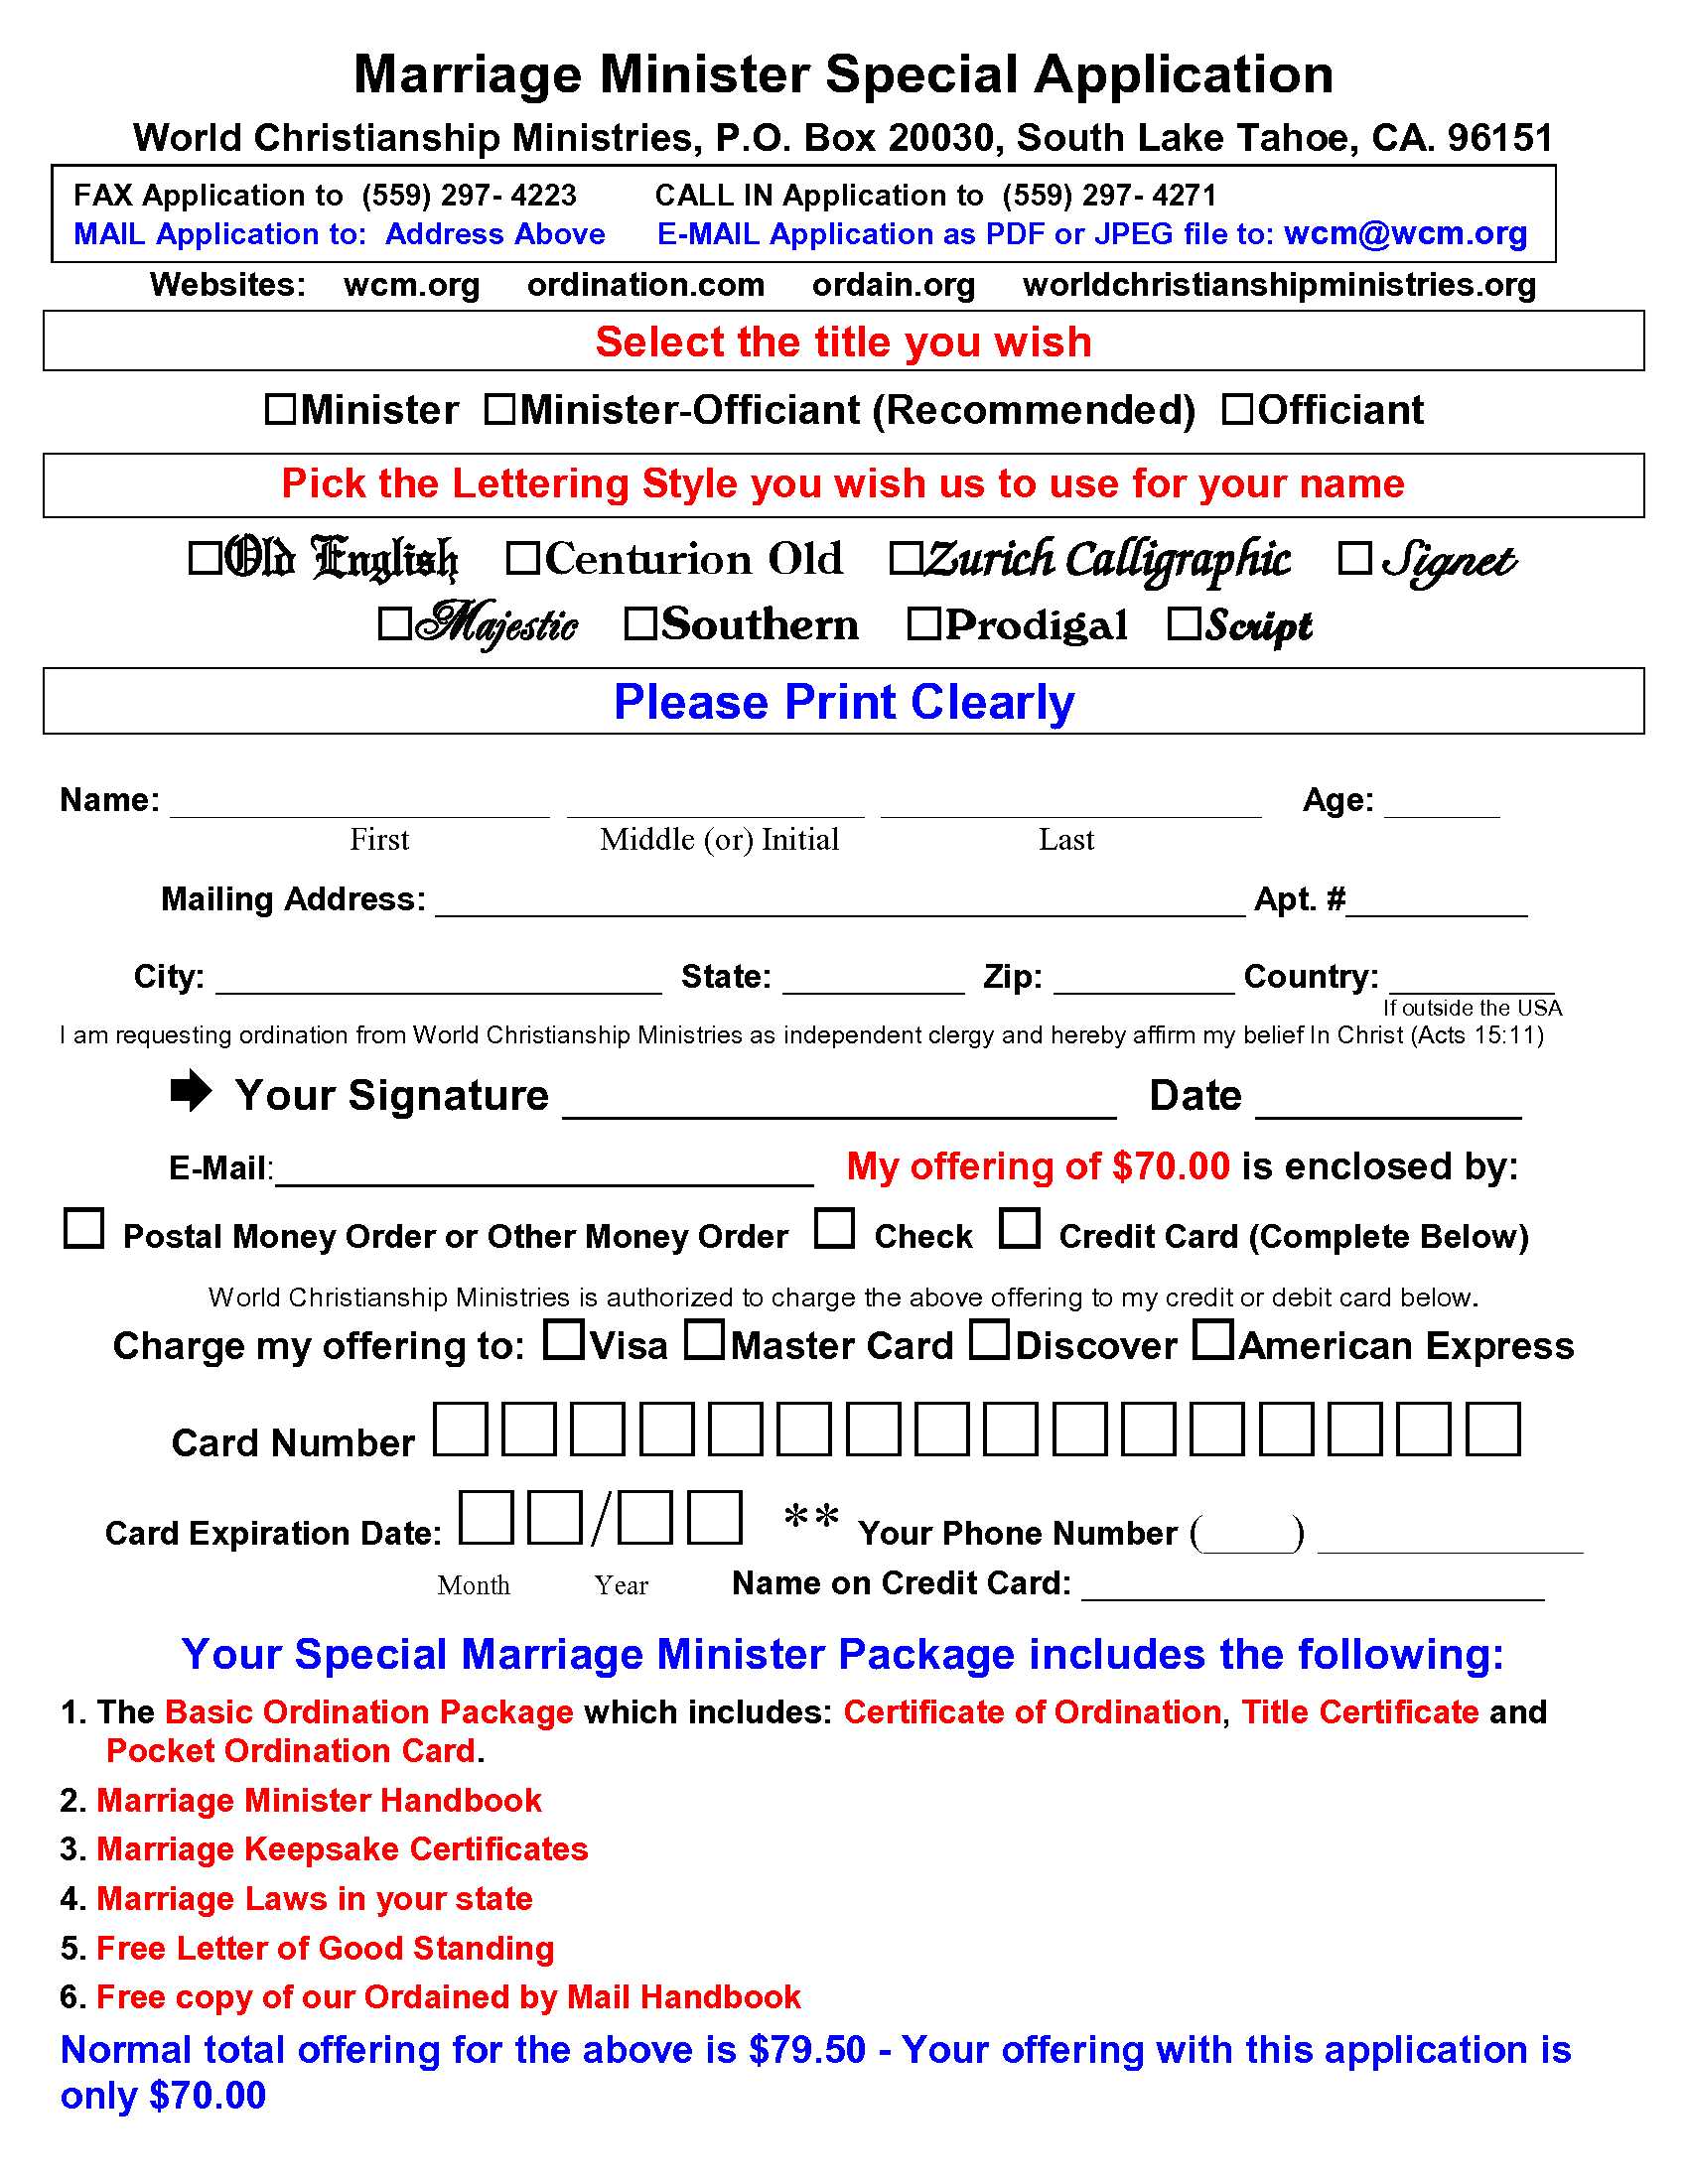 marriage minister ord app form